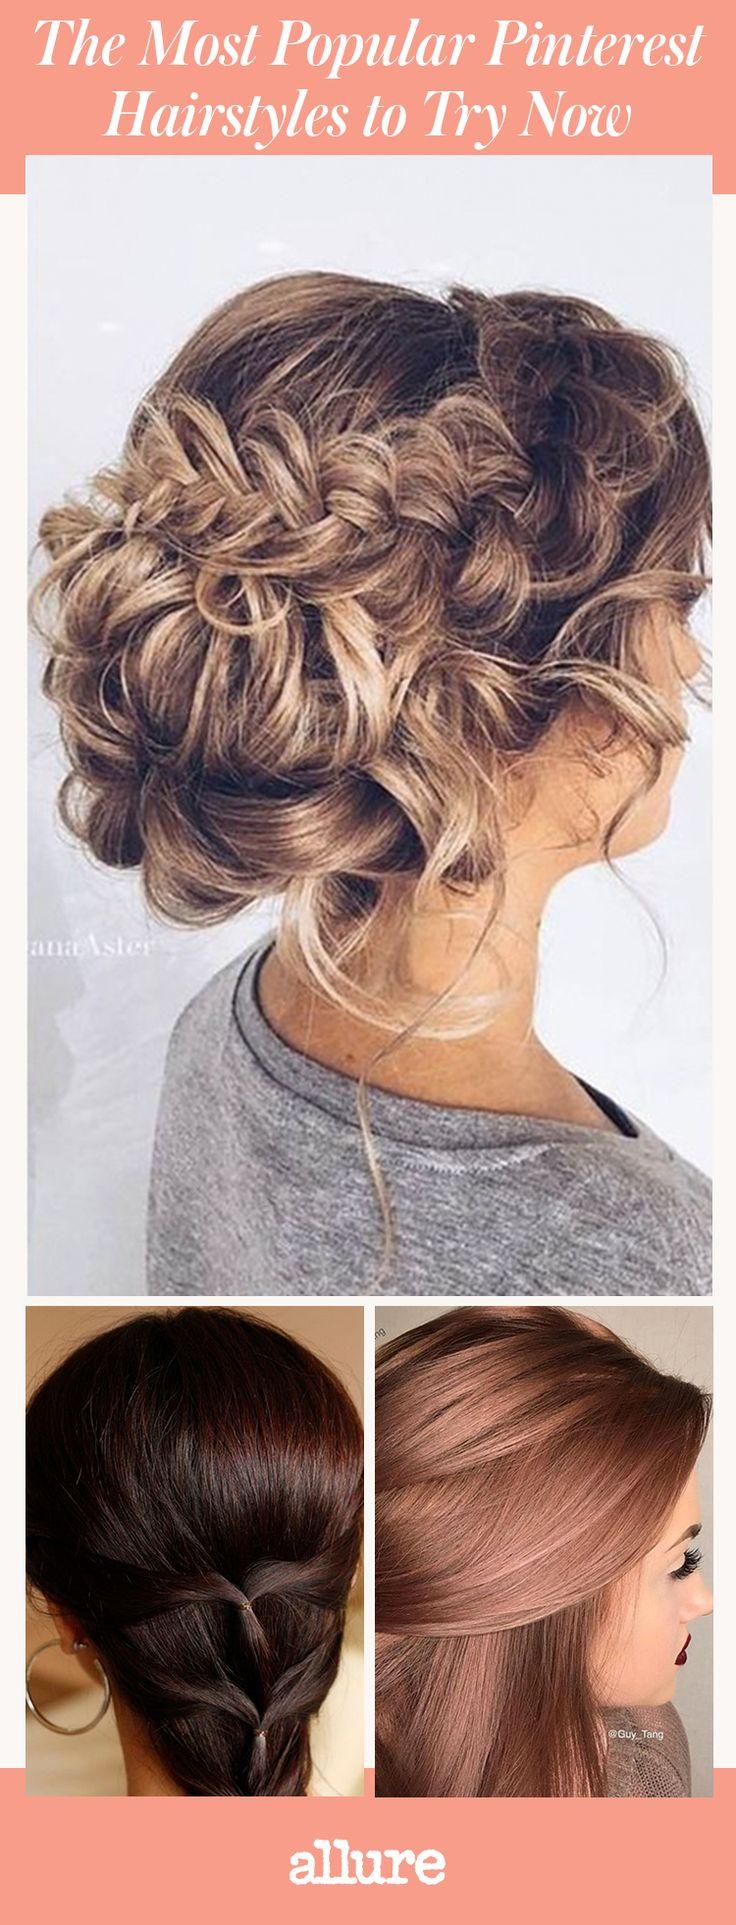 Свадьба - These Are The Most Popular Pinterest Hairstyles To Try Now